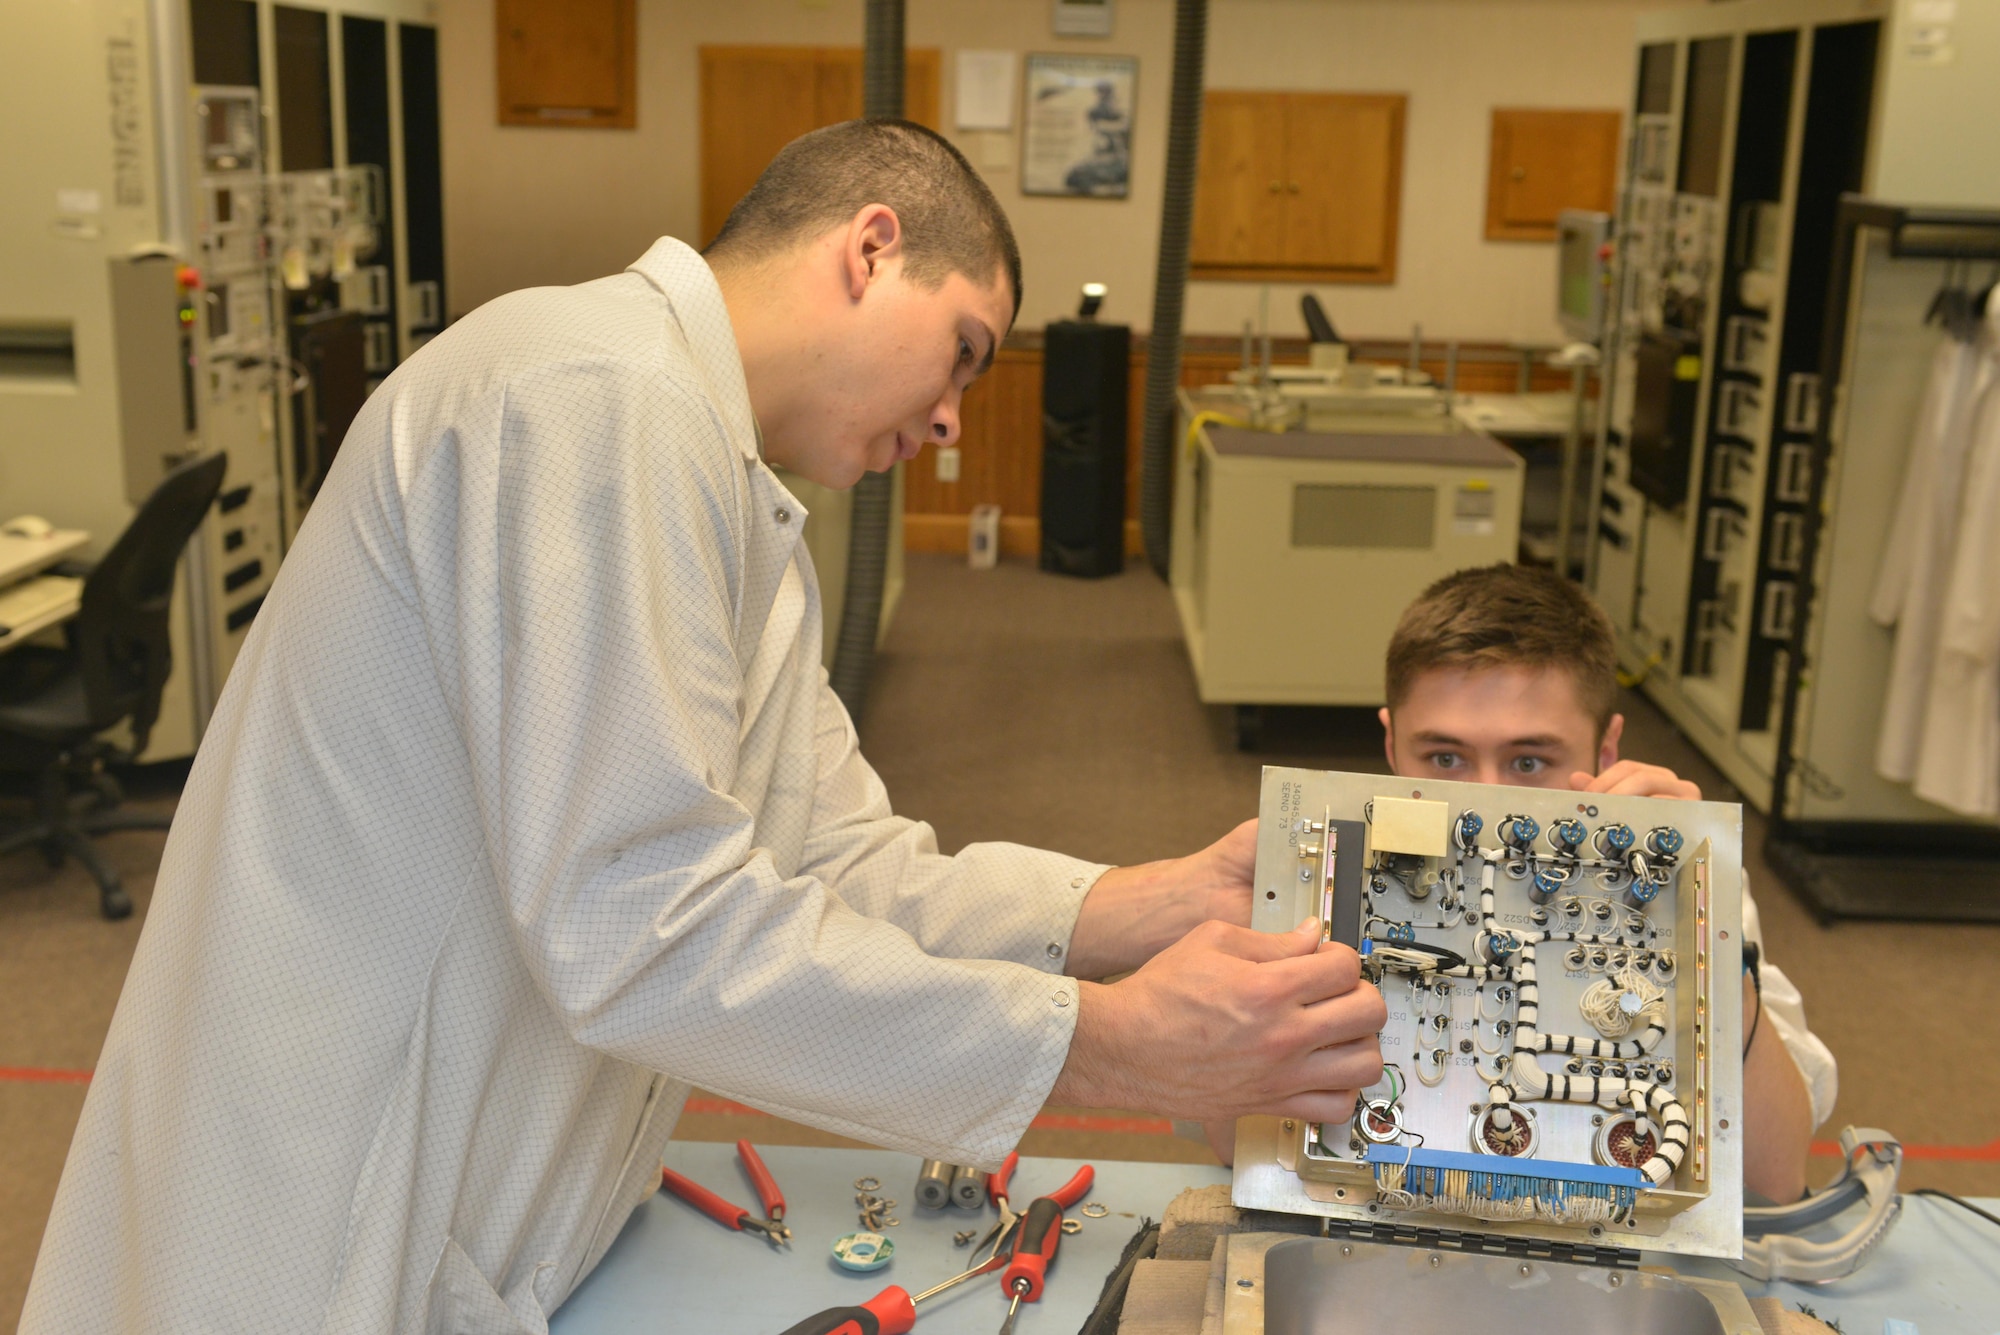 (From left) Staff Sgt. Dylan Wood, 791st Maintenance Squadron electronics laboratory trainer, and Senior Airman Maxwell Clement, 791st MXS ELAB technician, remove faulty components from a controller monitor at Minot Air Force Base, N.D., March 2, 2017. Electronic laboratory technicians are responsible for maintenance and quality assurance of the Minuteman III Intercontinental Ballistic Missile support equipment. (U.S. Air Force photo/Airman 1st Class Jessica Weissman)